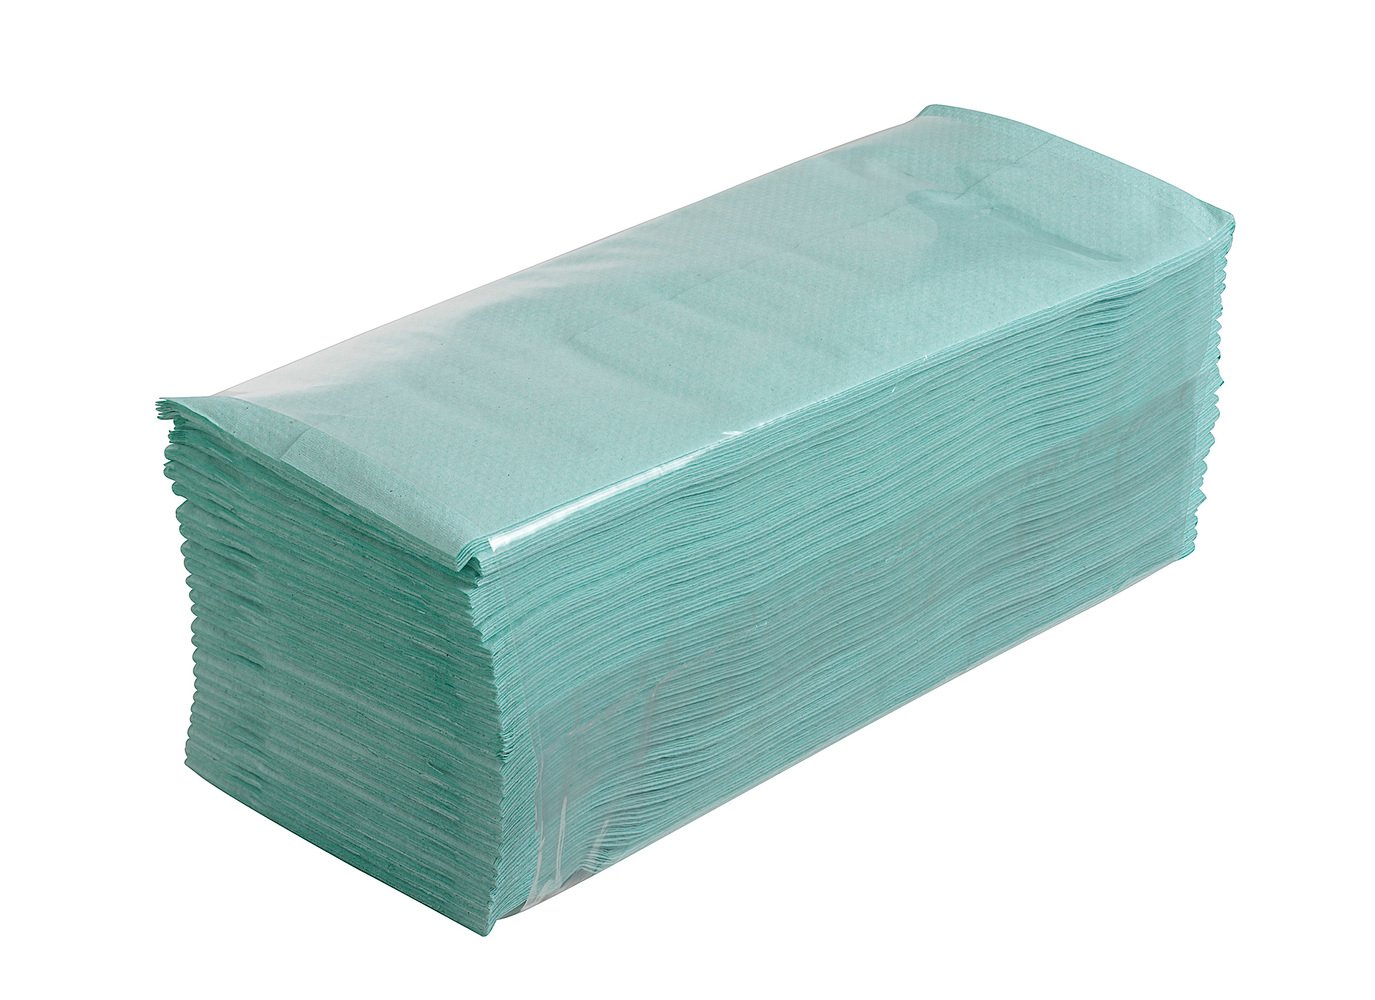 Hostess™ Folded Hand Towels 6871 – 24 packs x 224 green, 1 ply sheets - 6871